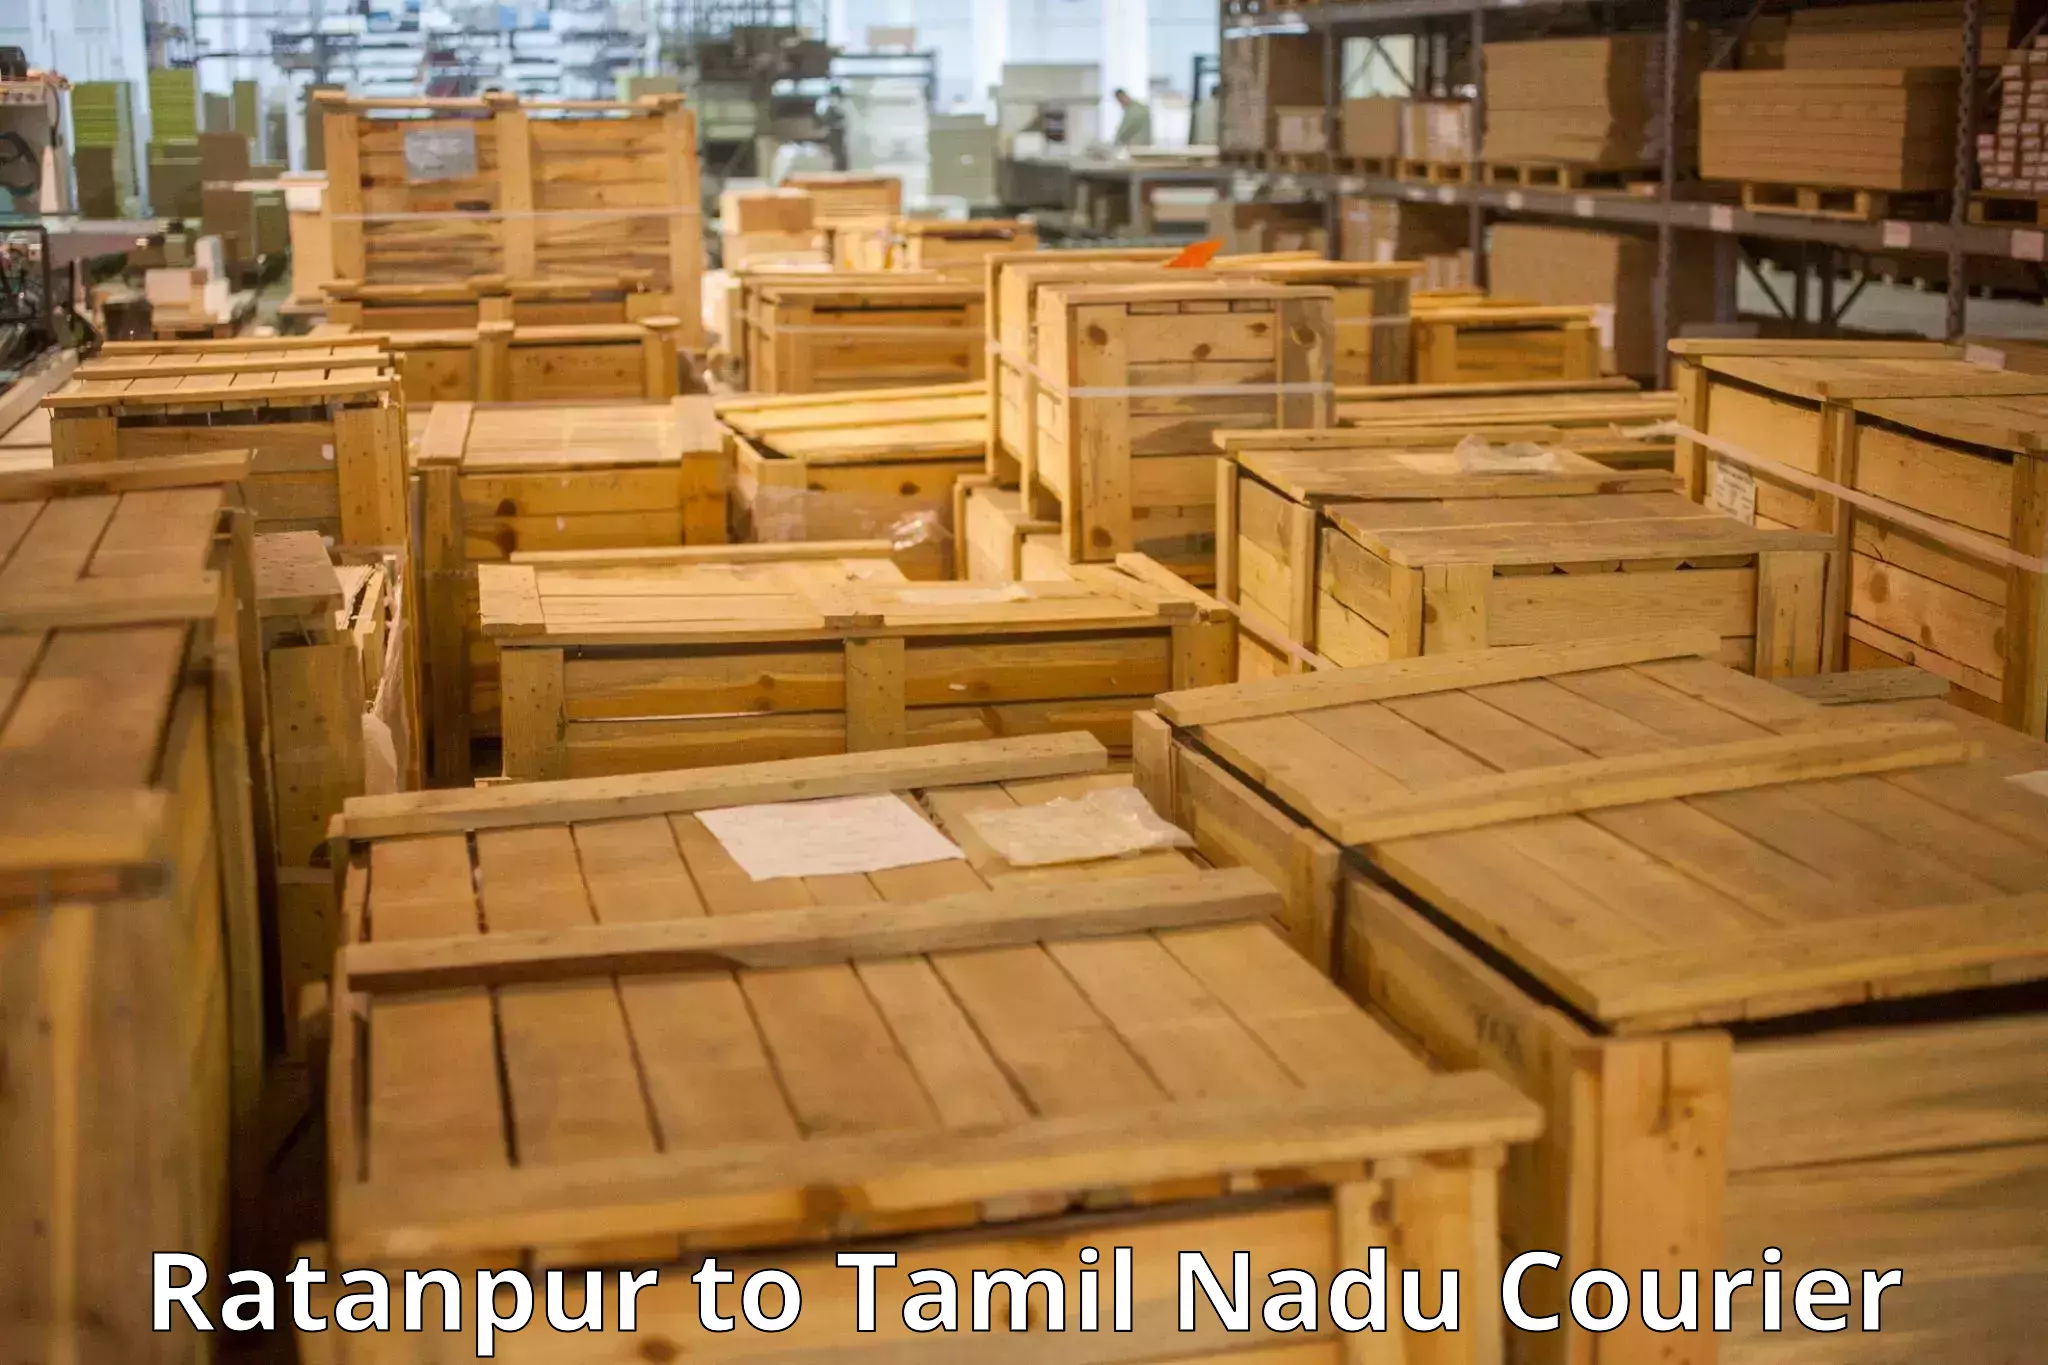 Luggage shipping specialists Ratanpur to Chennai